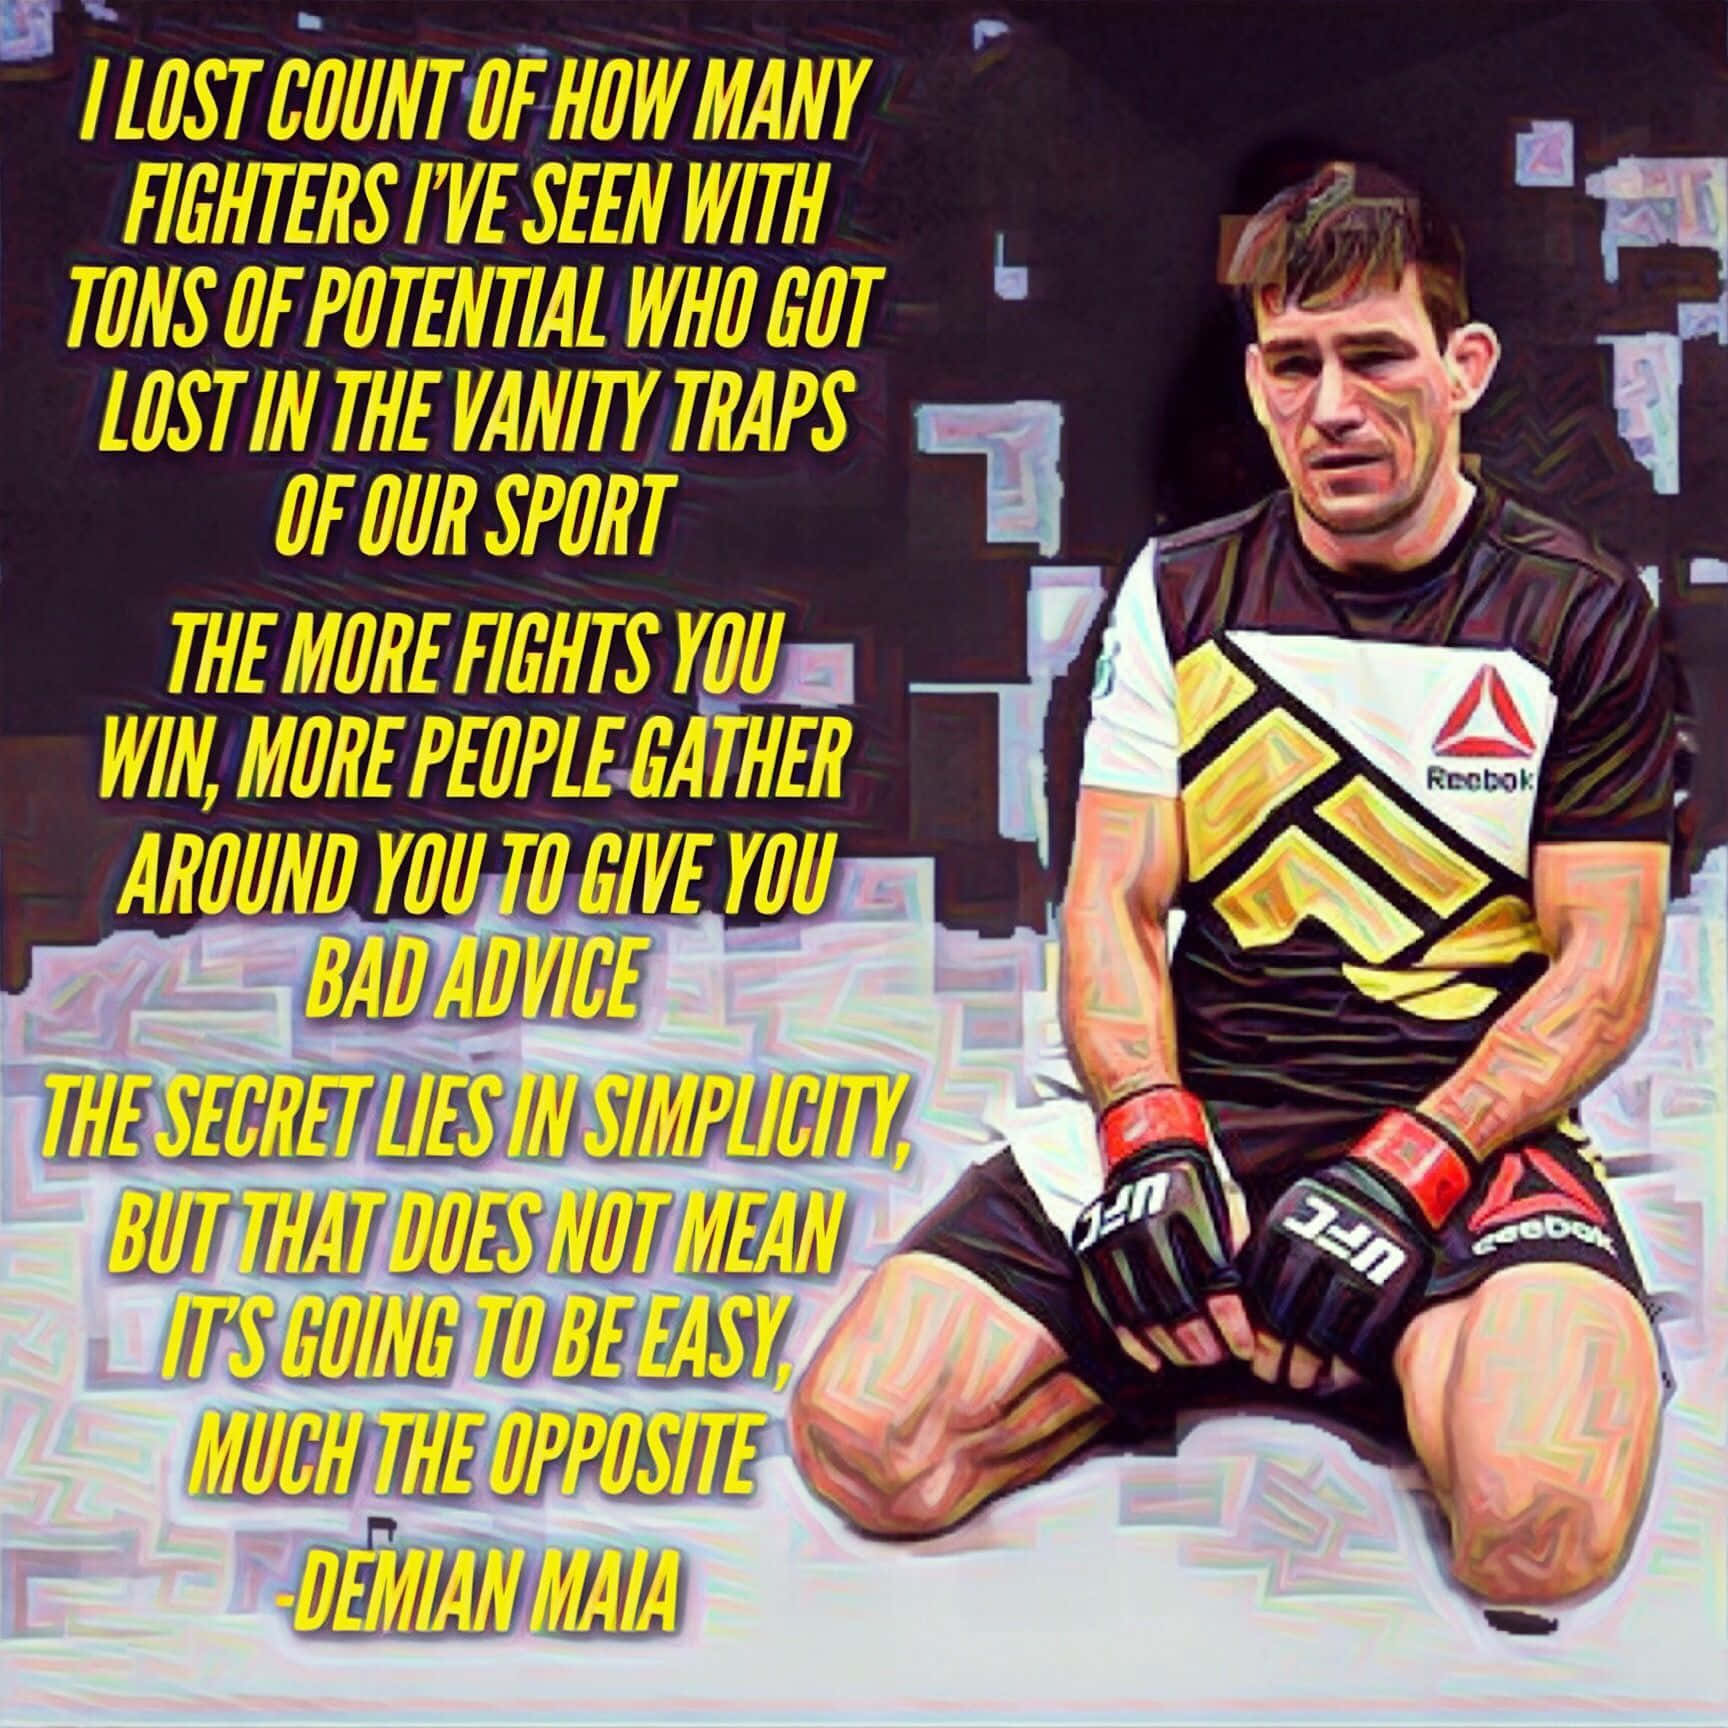 Demian Maia UFC Submission Grappler Wallpaper